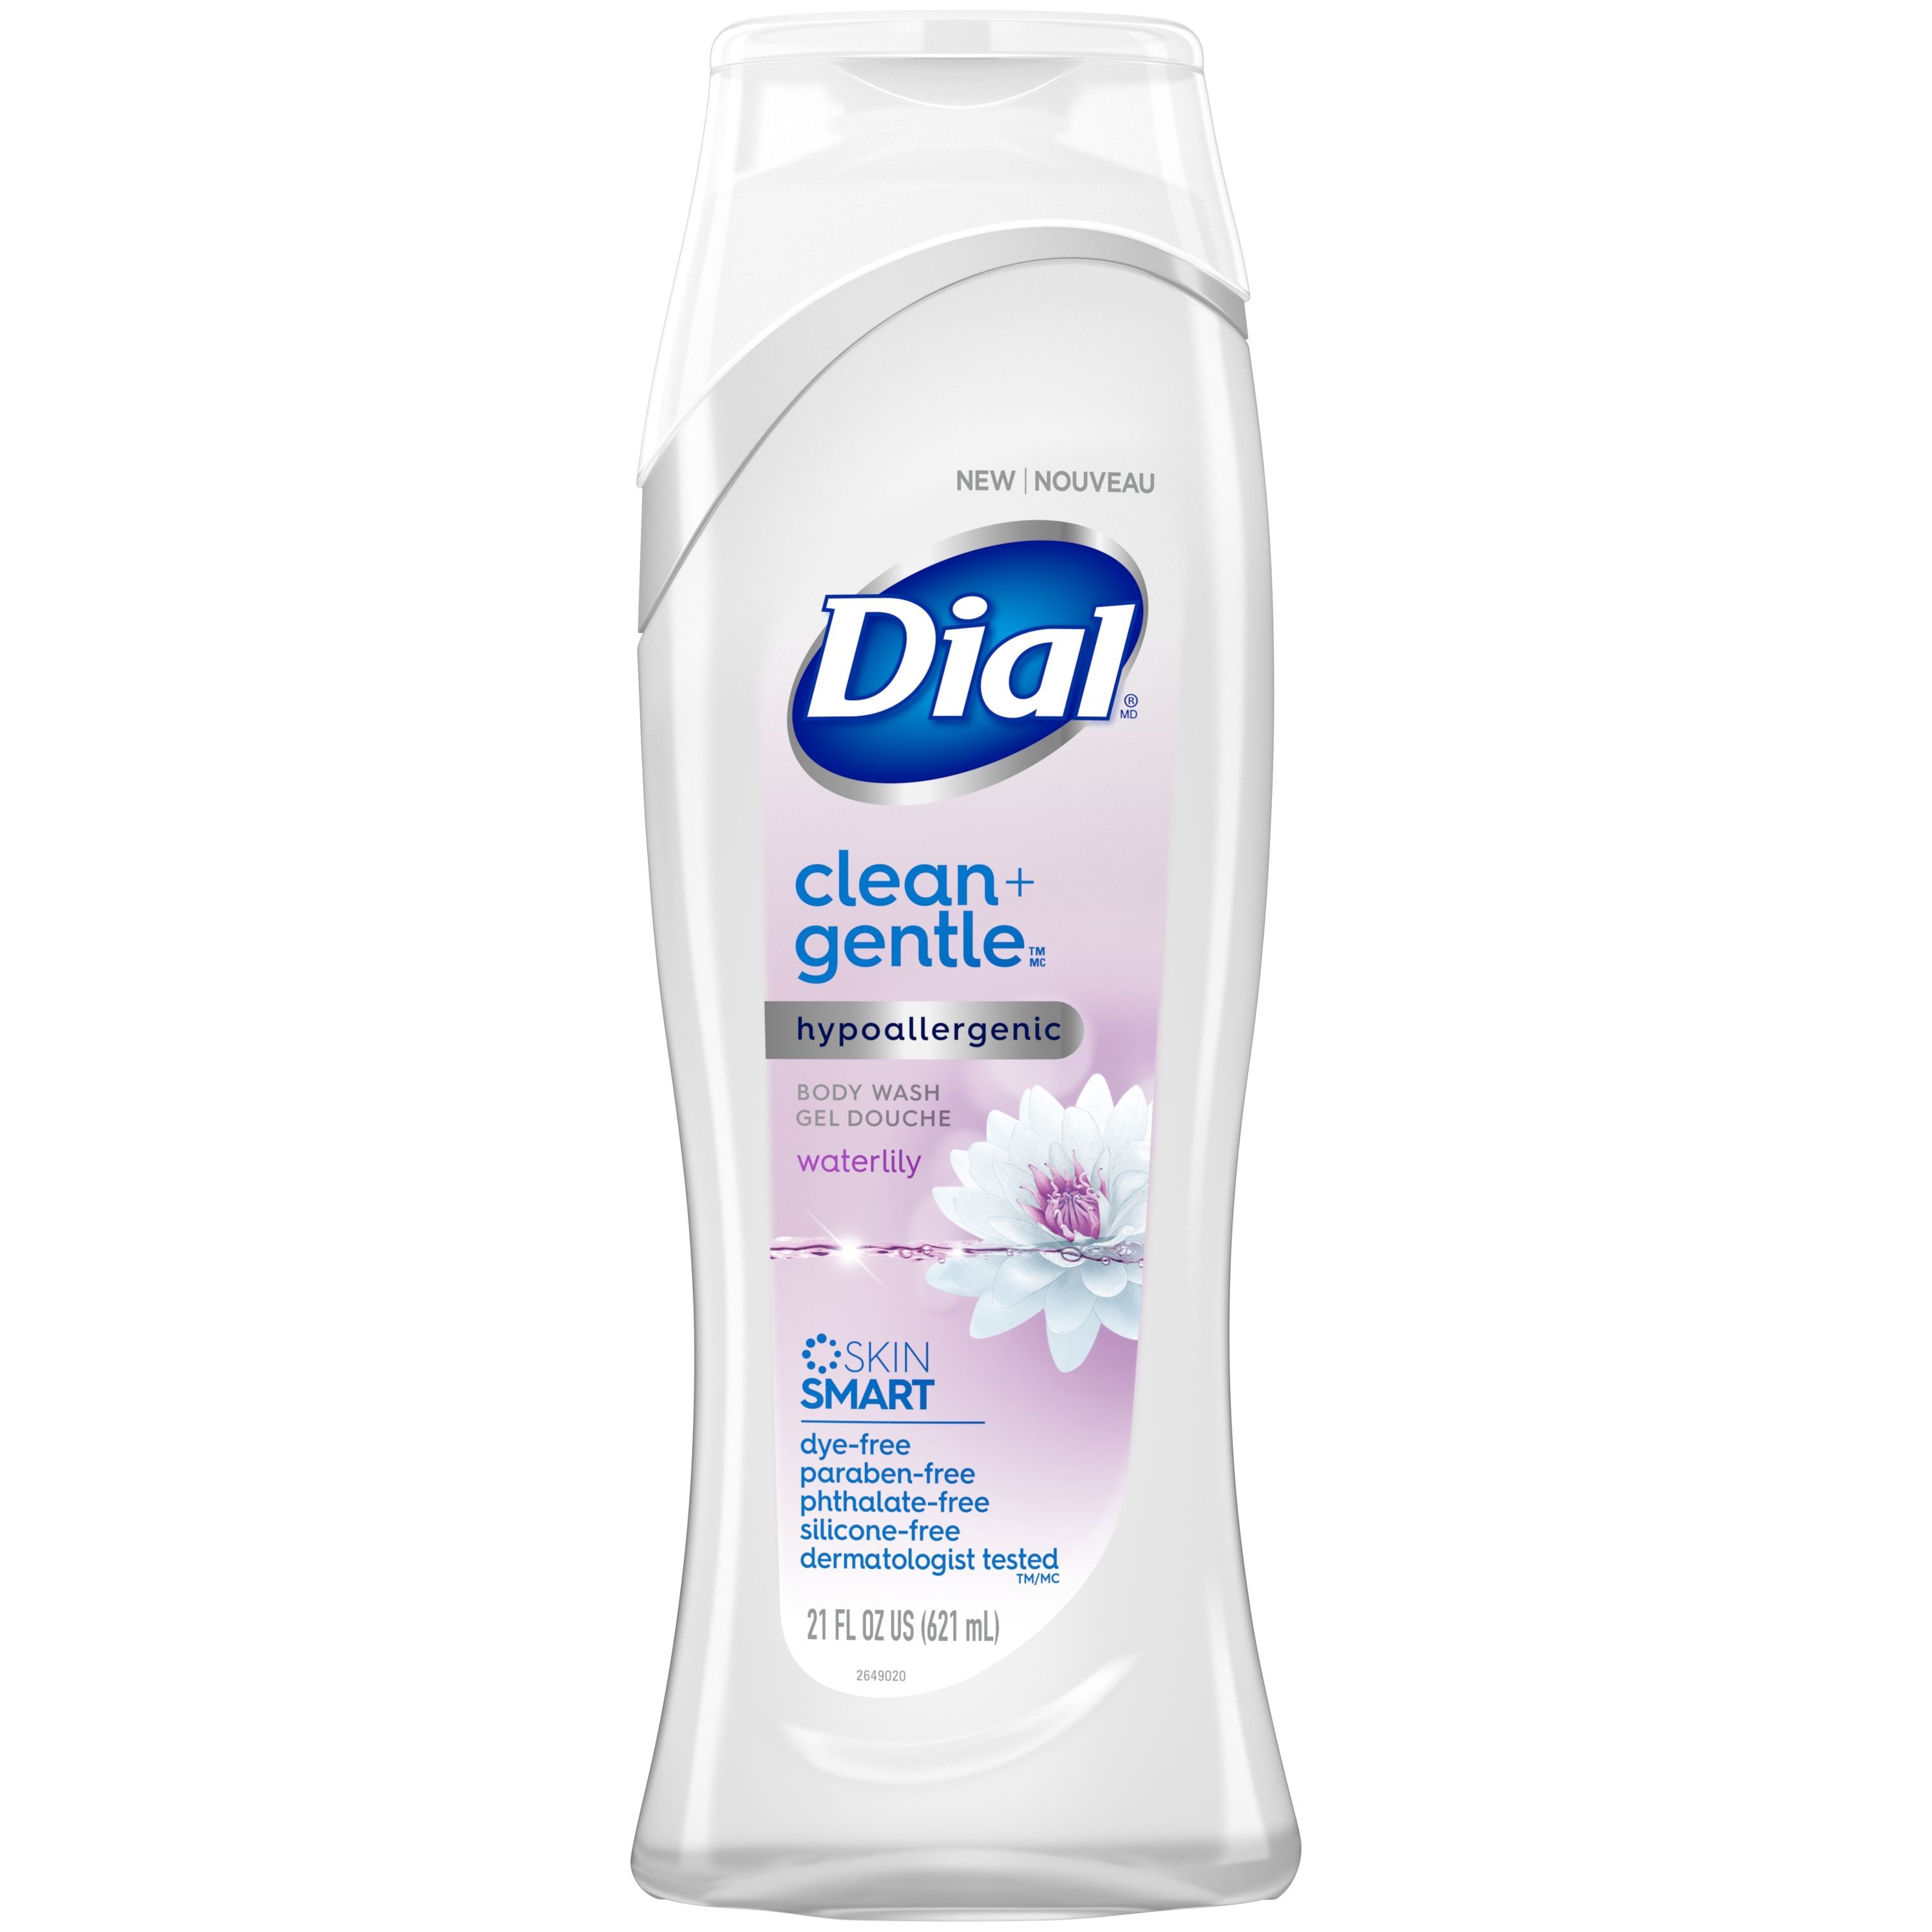 Dial Clean + Gentle Body Wash